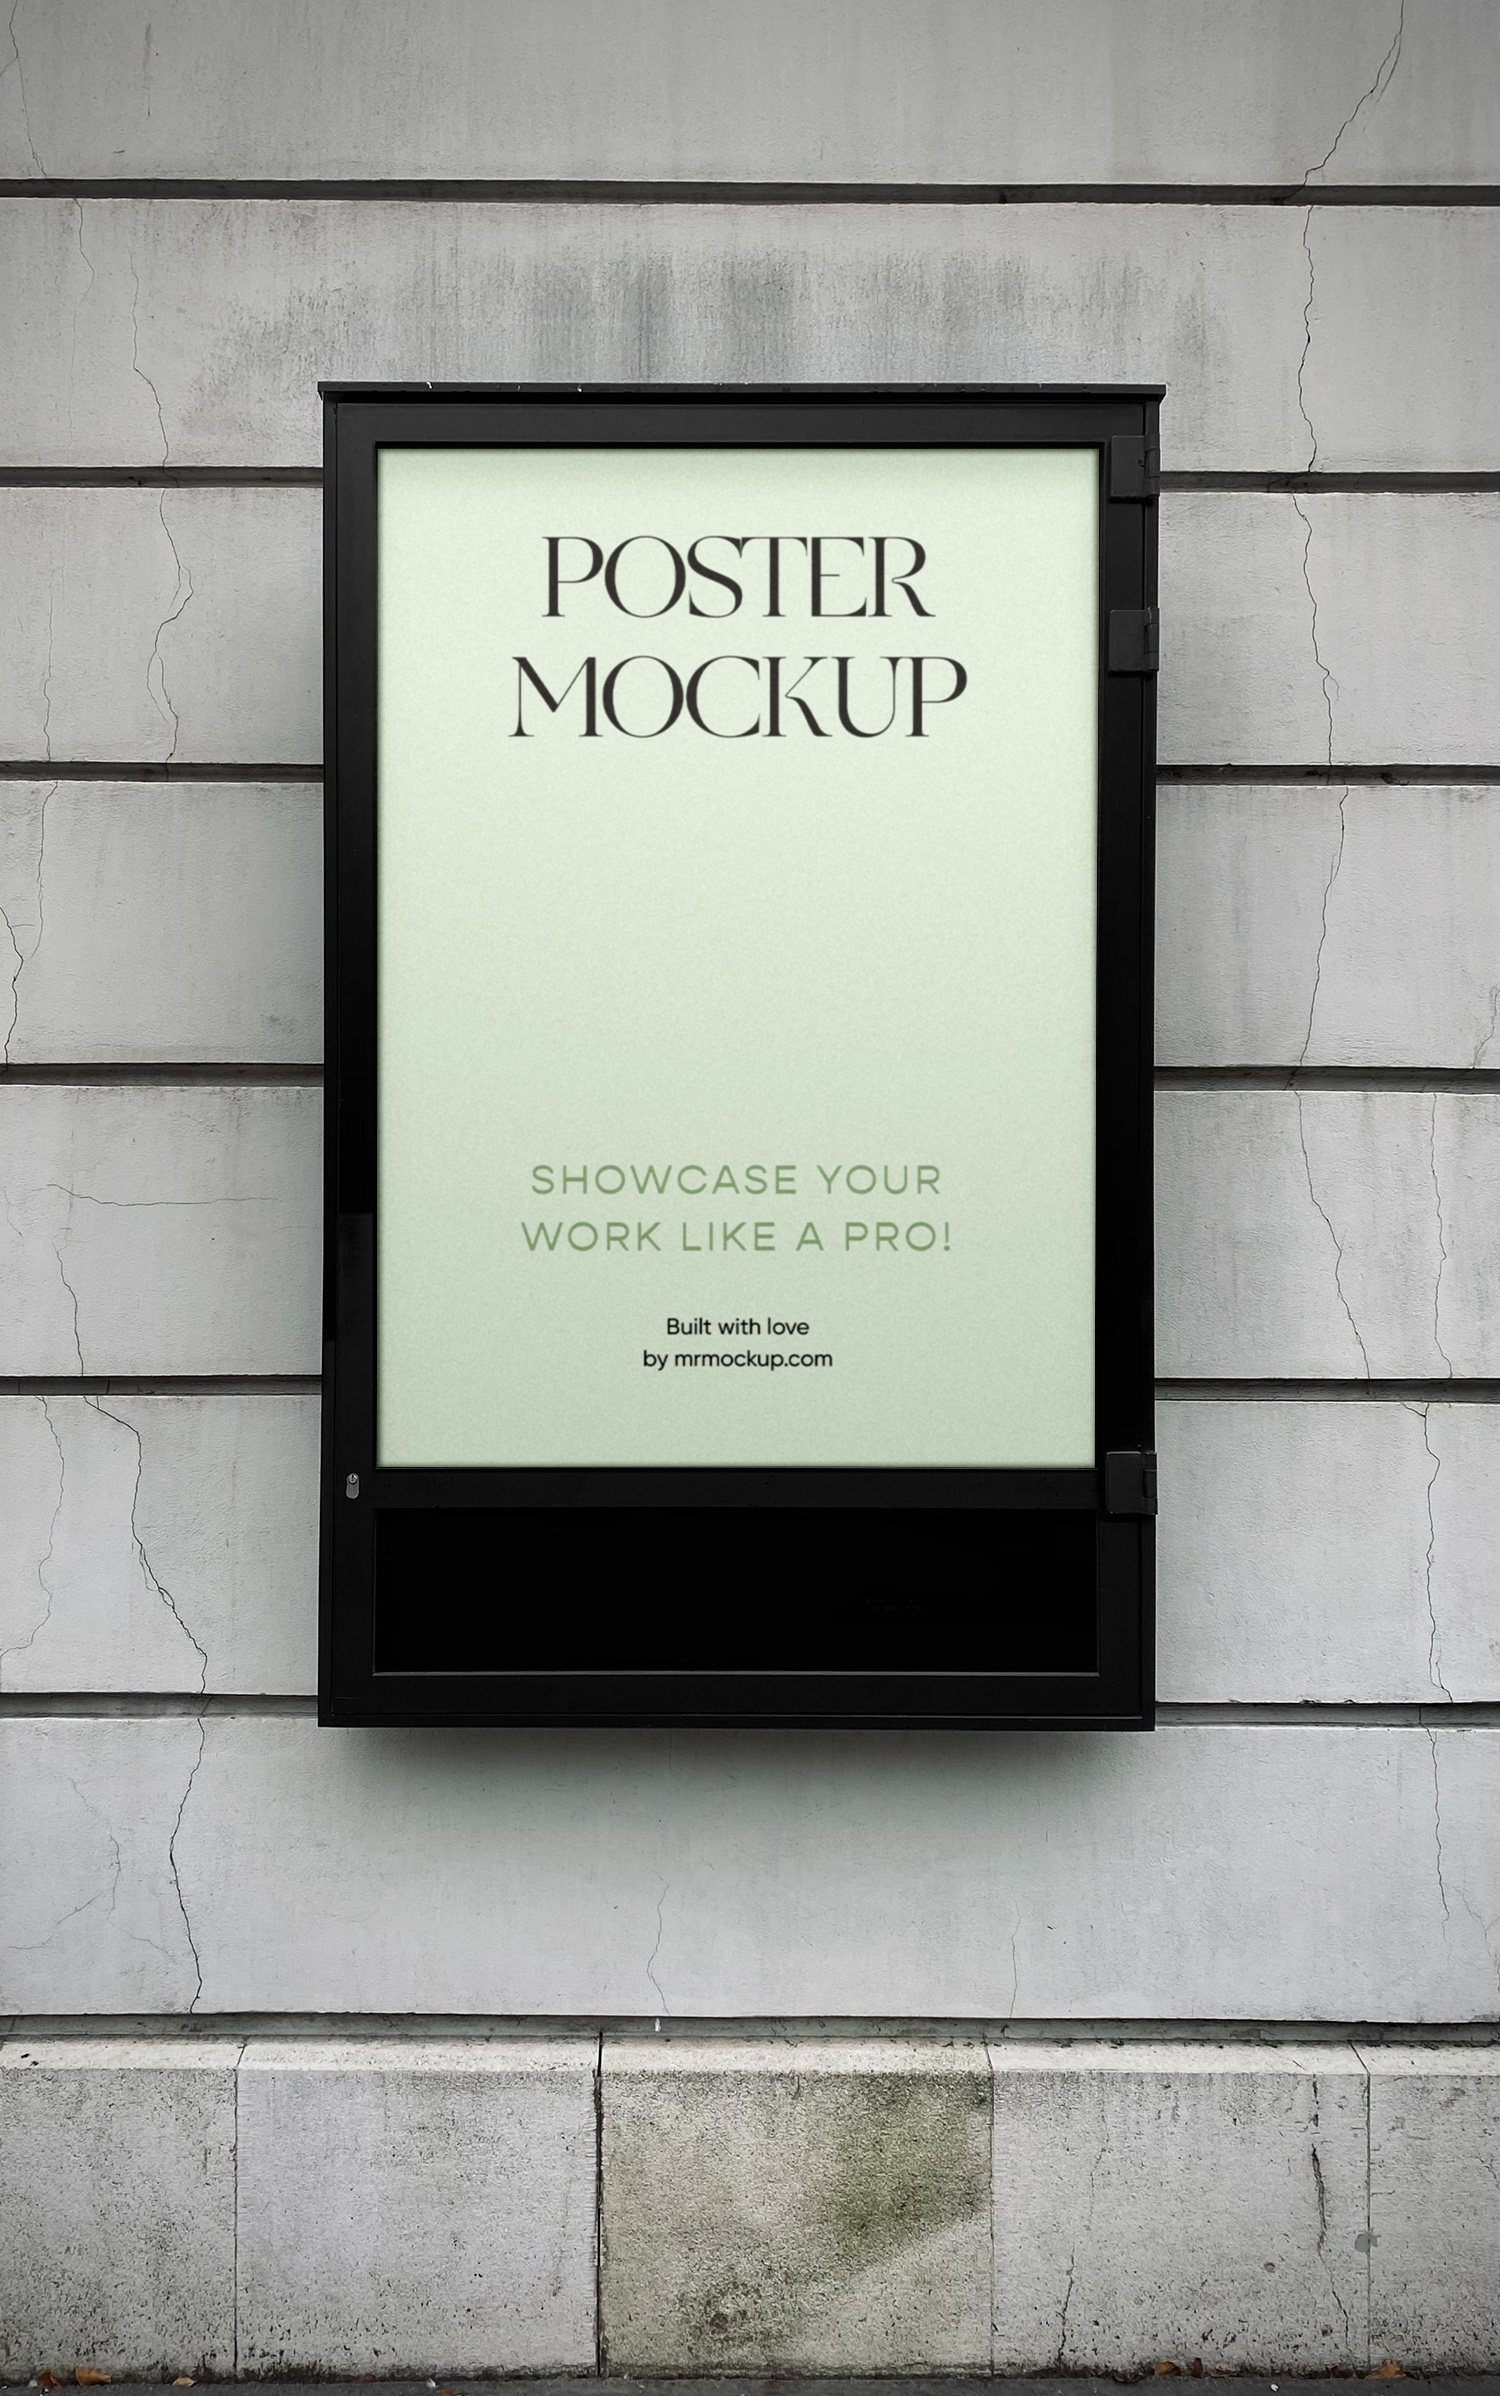 Free Poster on Building Wall Mockup